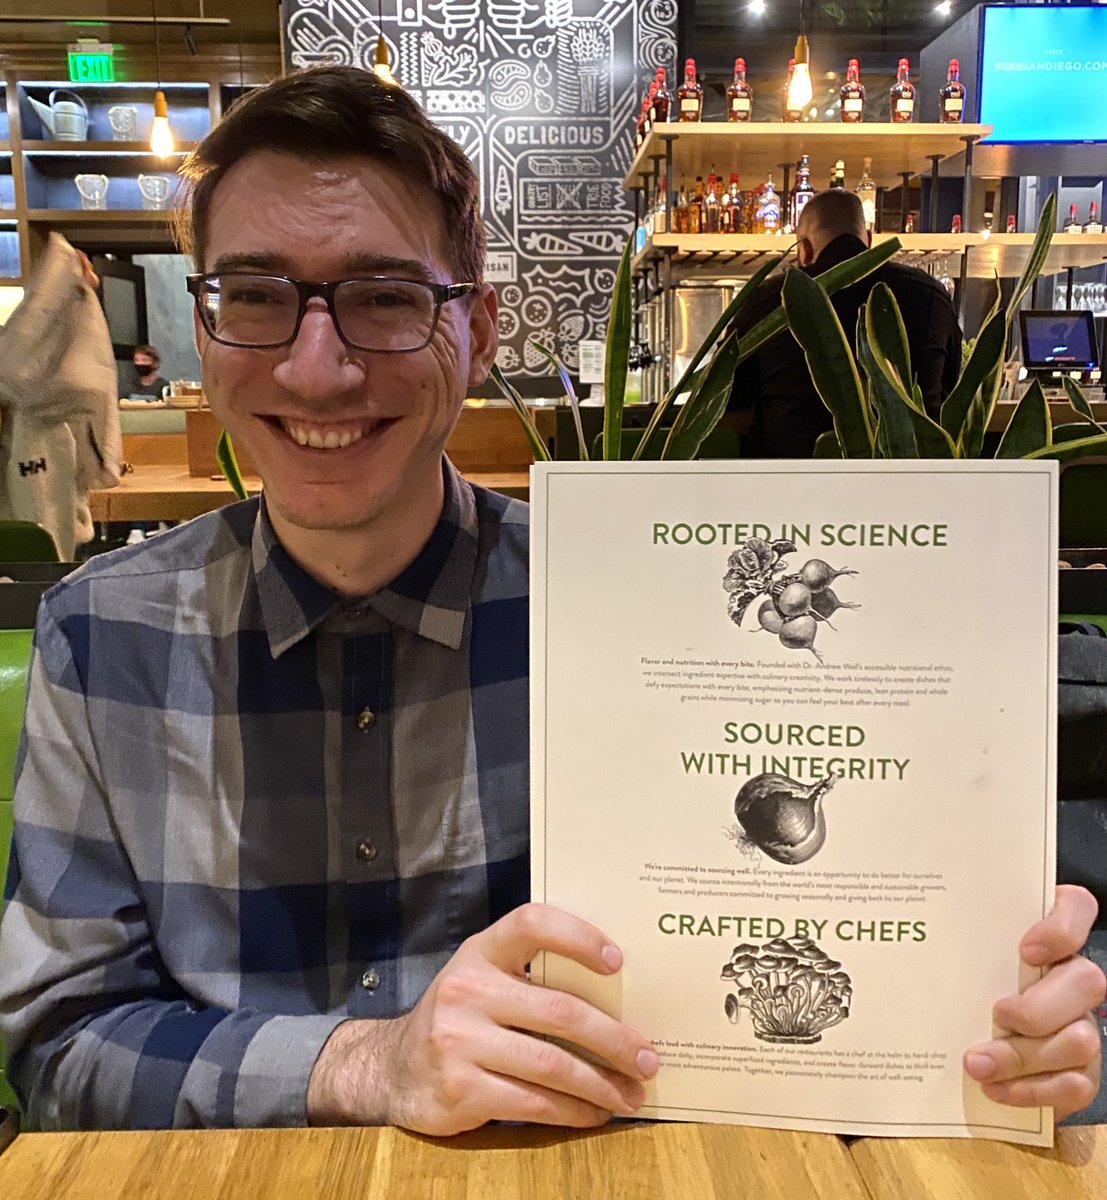 .@DearingLab @UofUBiology Congrats to Dylan Klure, recipient of this year’s Outstanding Graduate Student Award from the College of Science!!(yes that’s a menu and not the actual award, but whose looking that closely??)